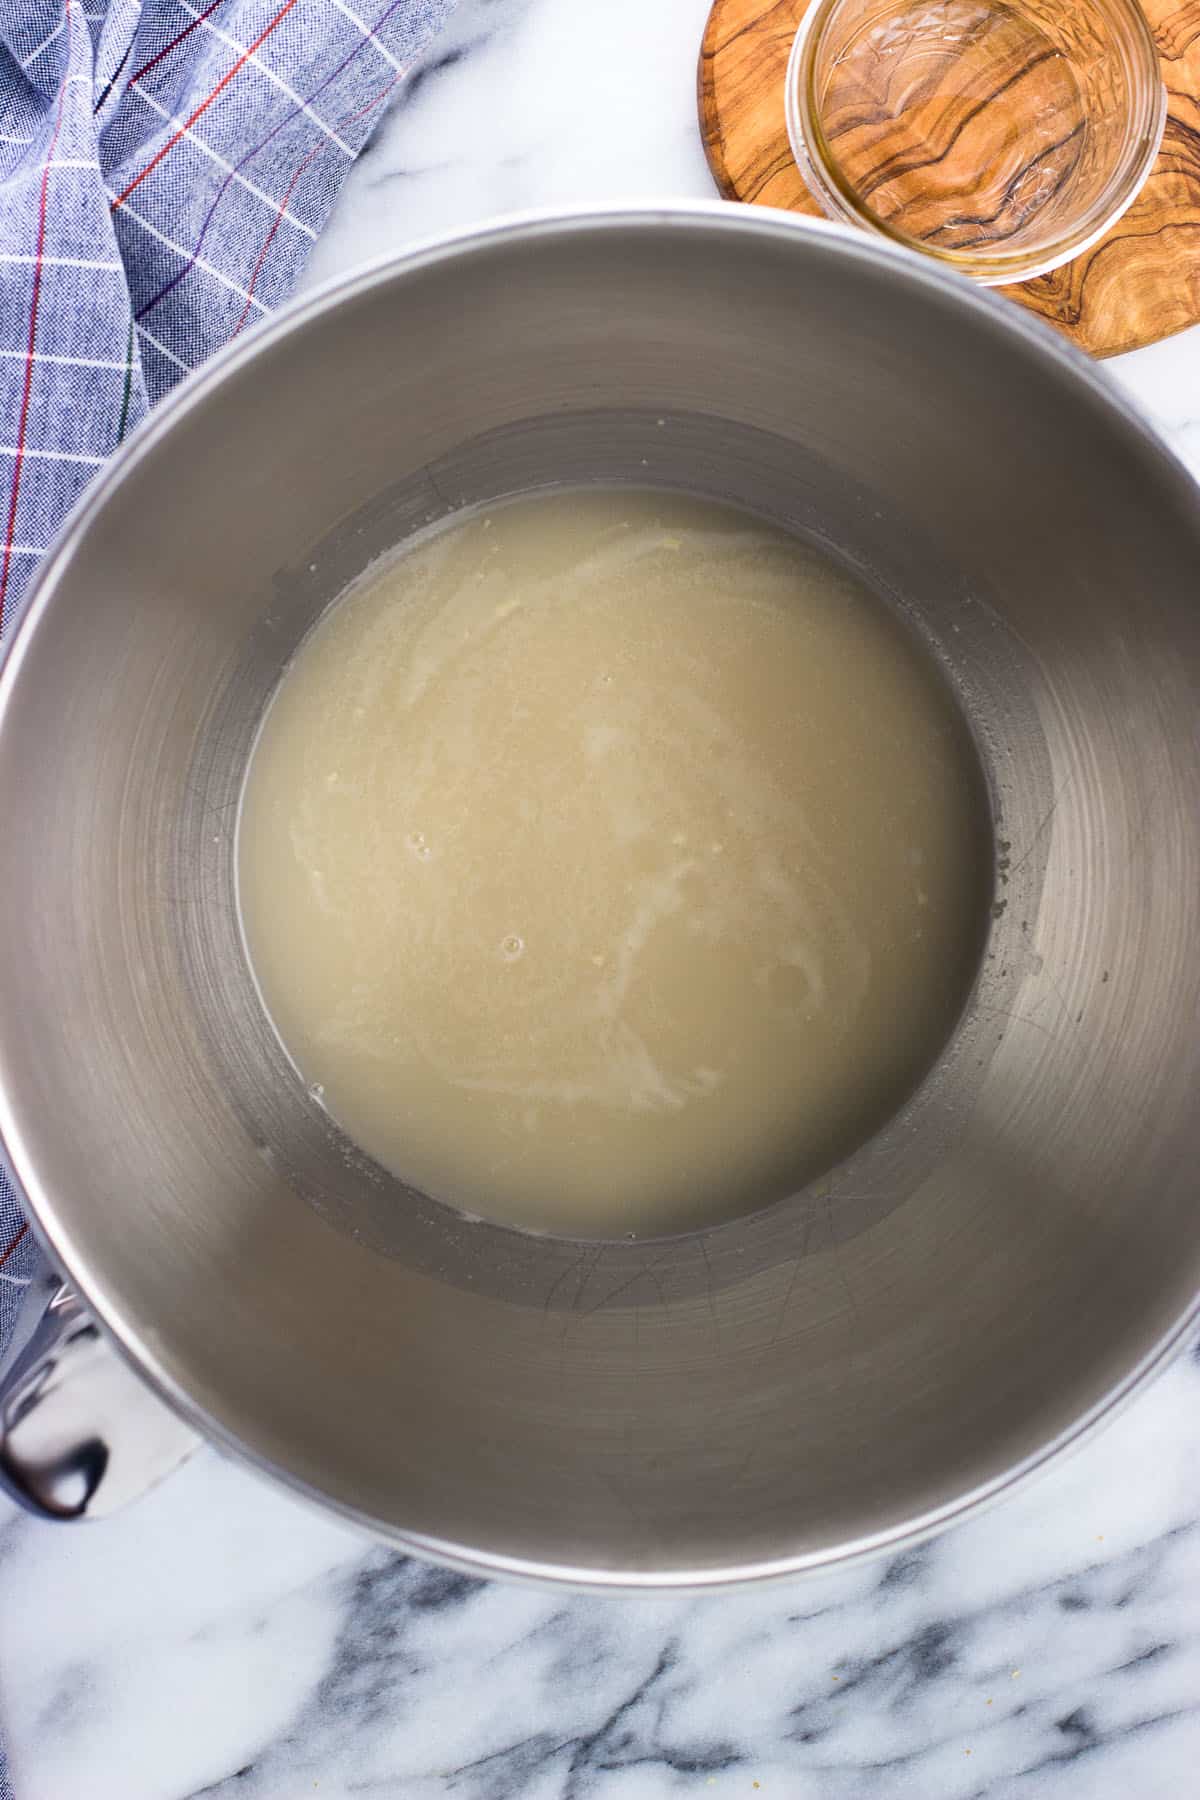 Frothy activated yeast in warm water in a metal stand mixer bowl.